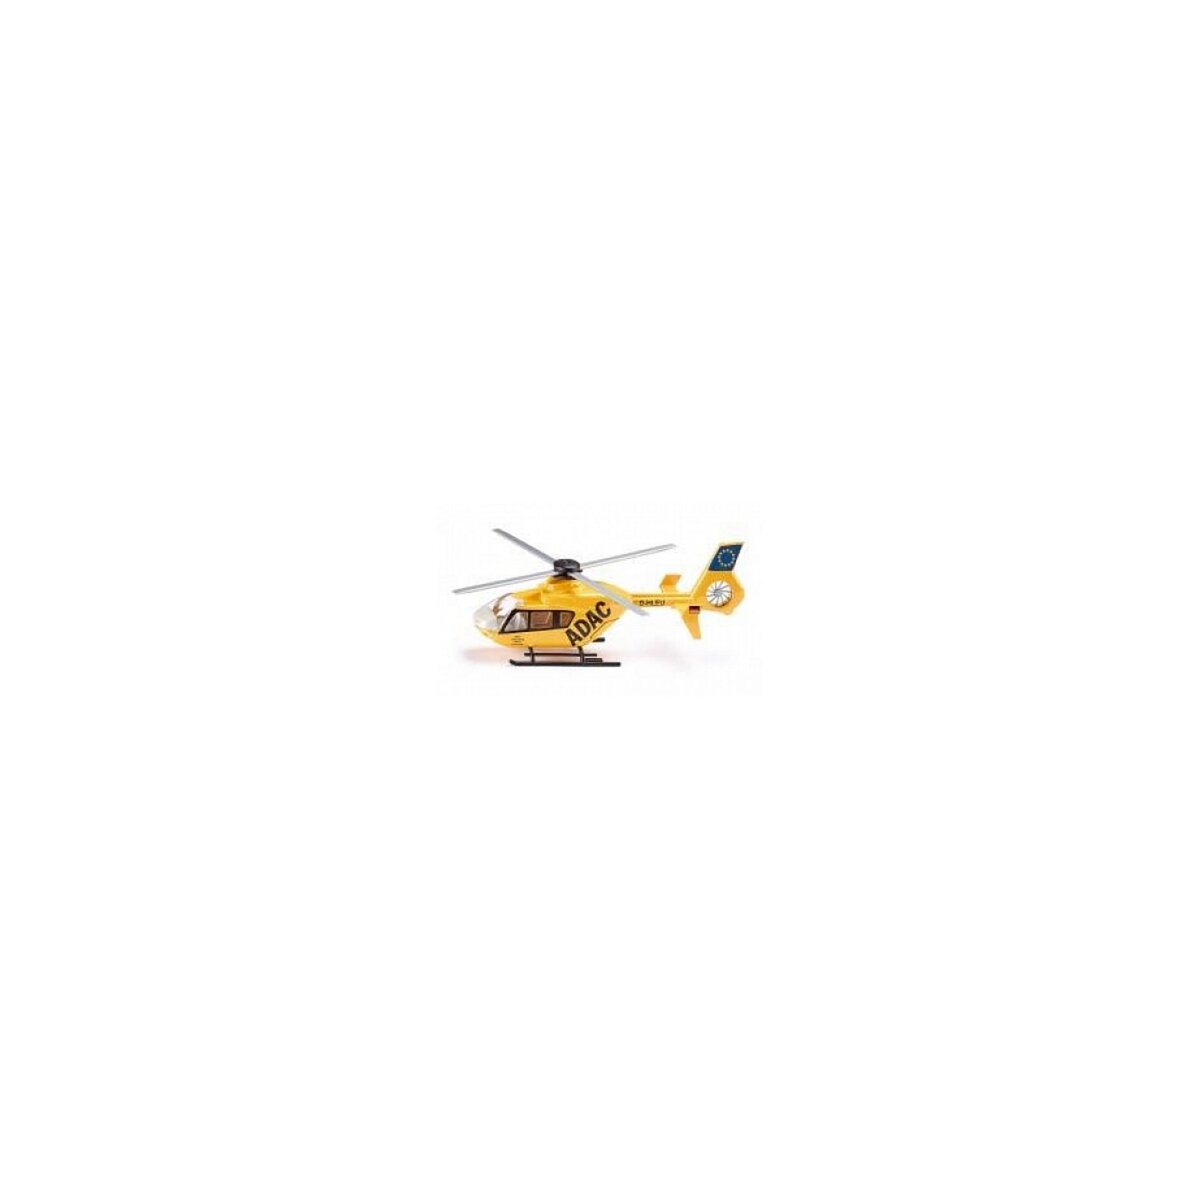 Siku 2539 Helicoptere premiers secours 1:55